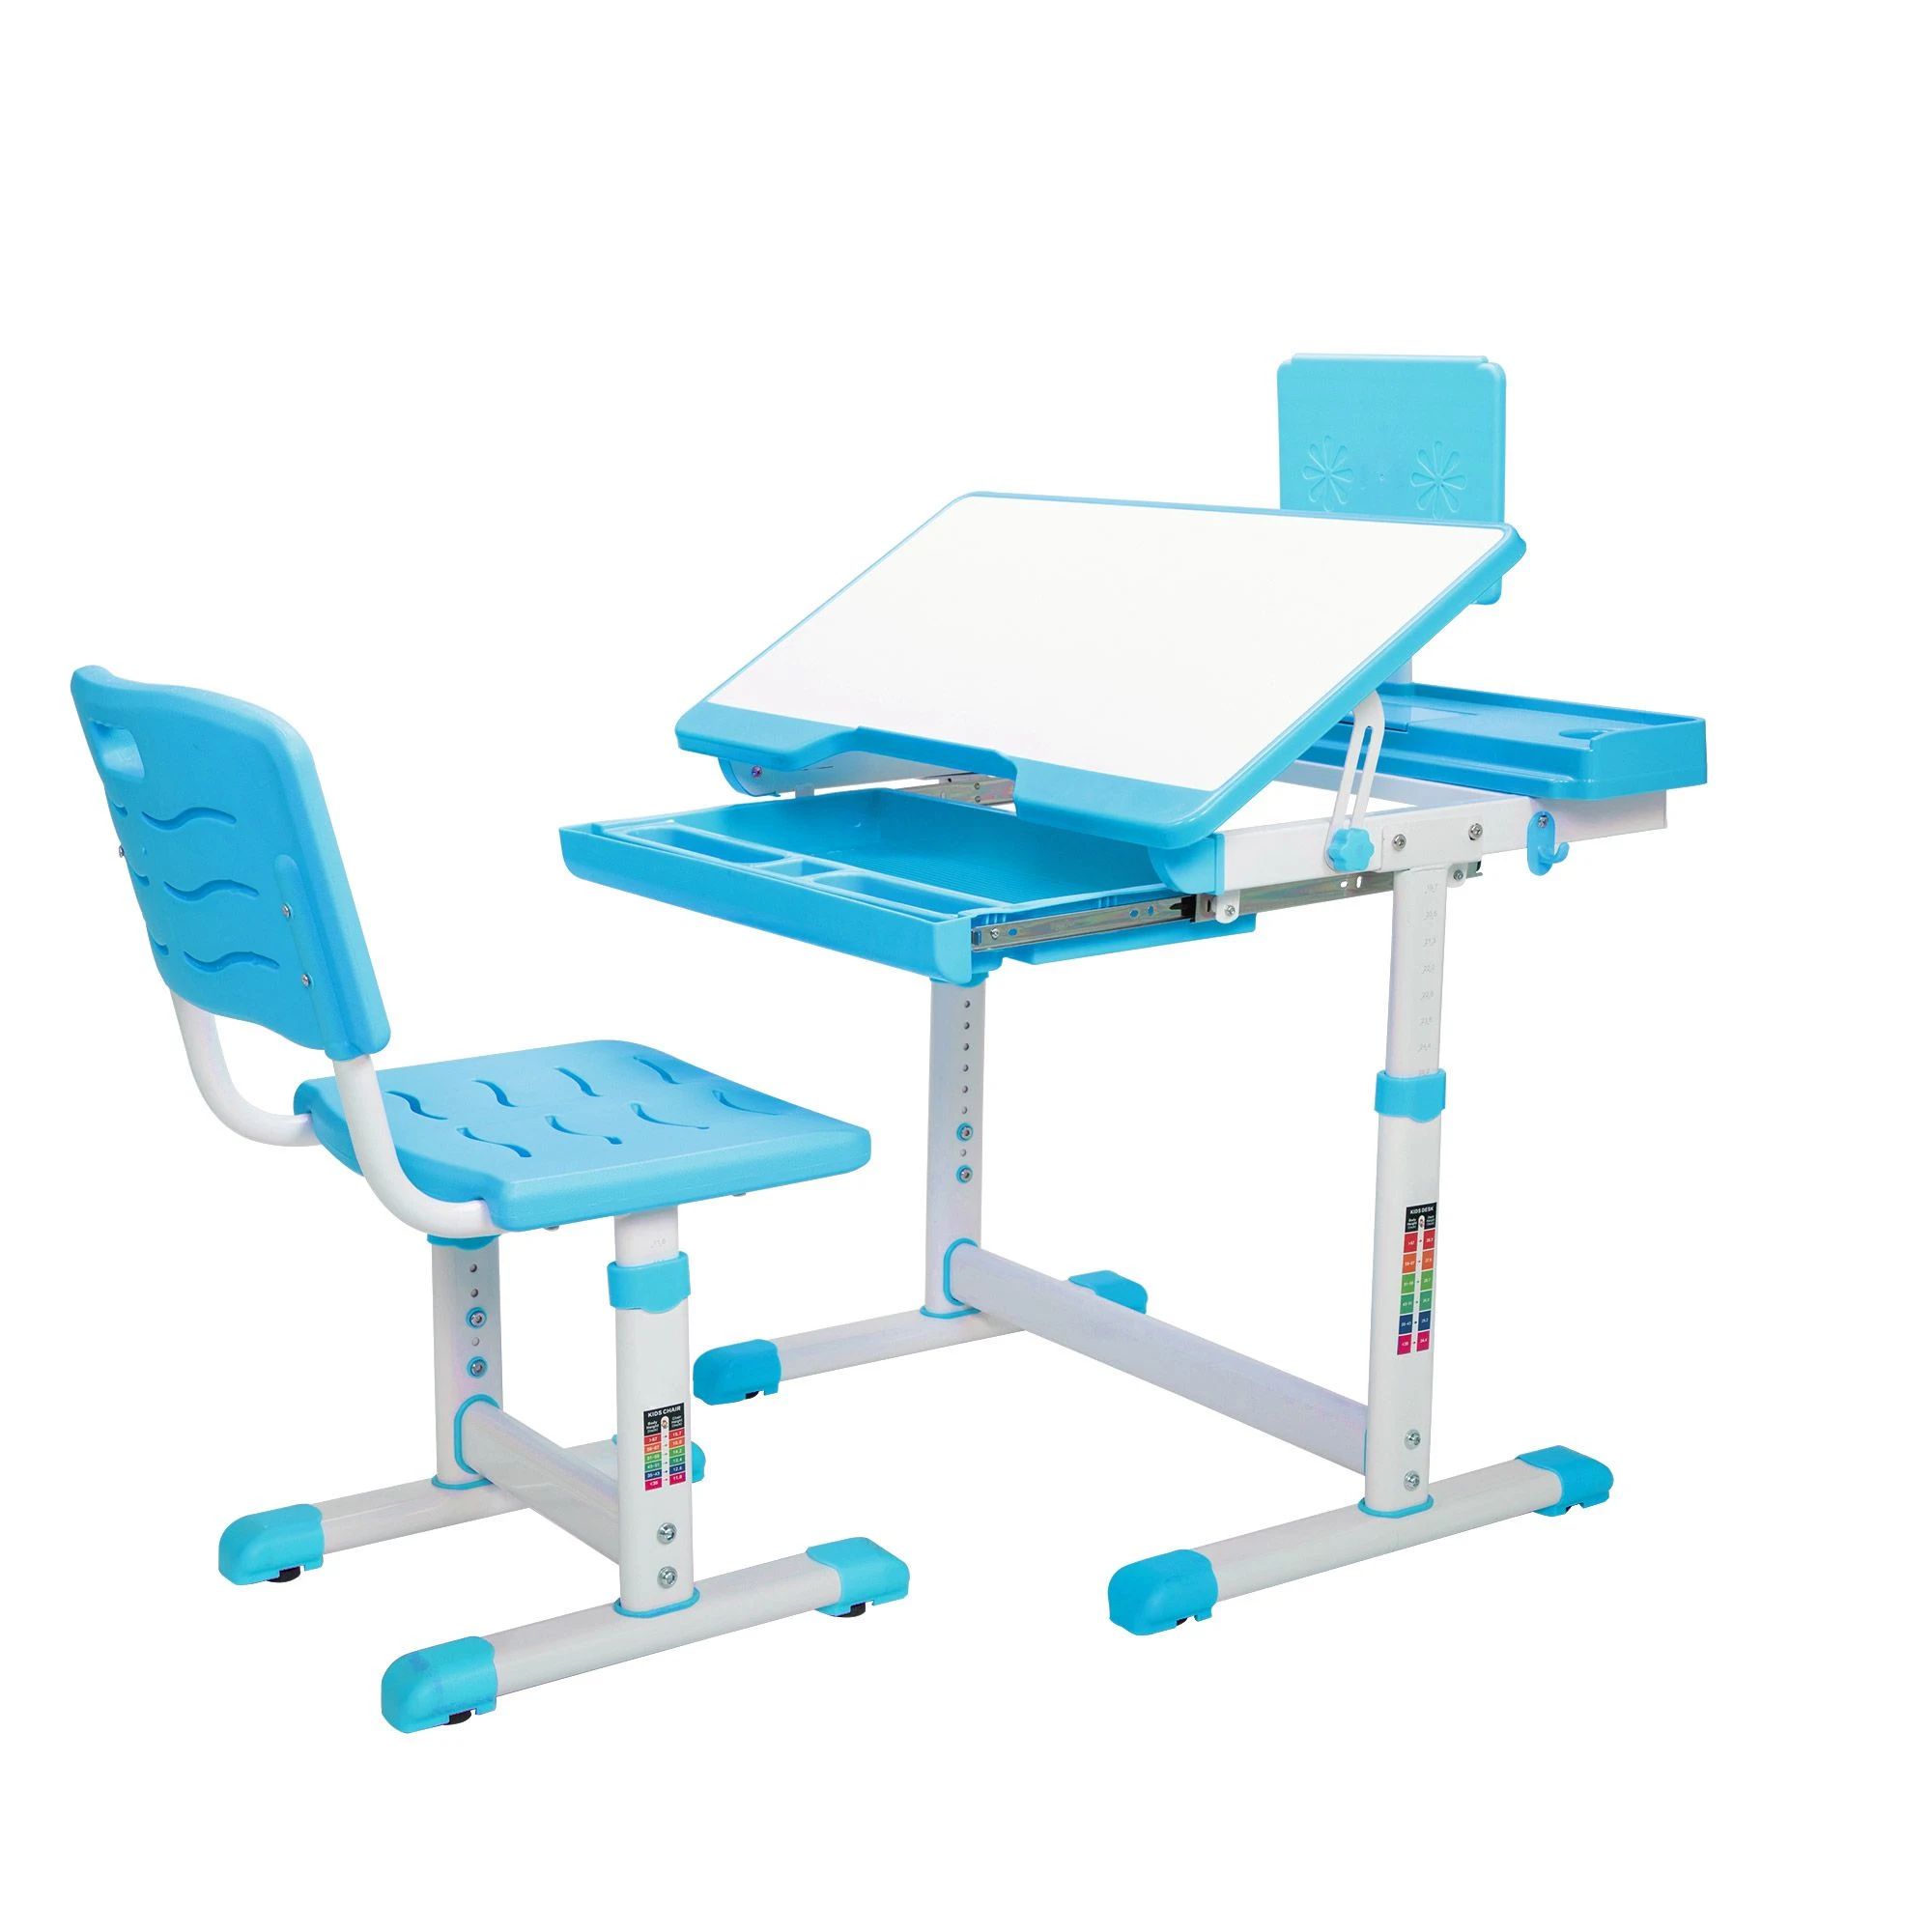 Child lift learning desk and chair Kit-CASAINC